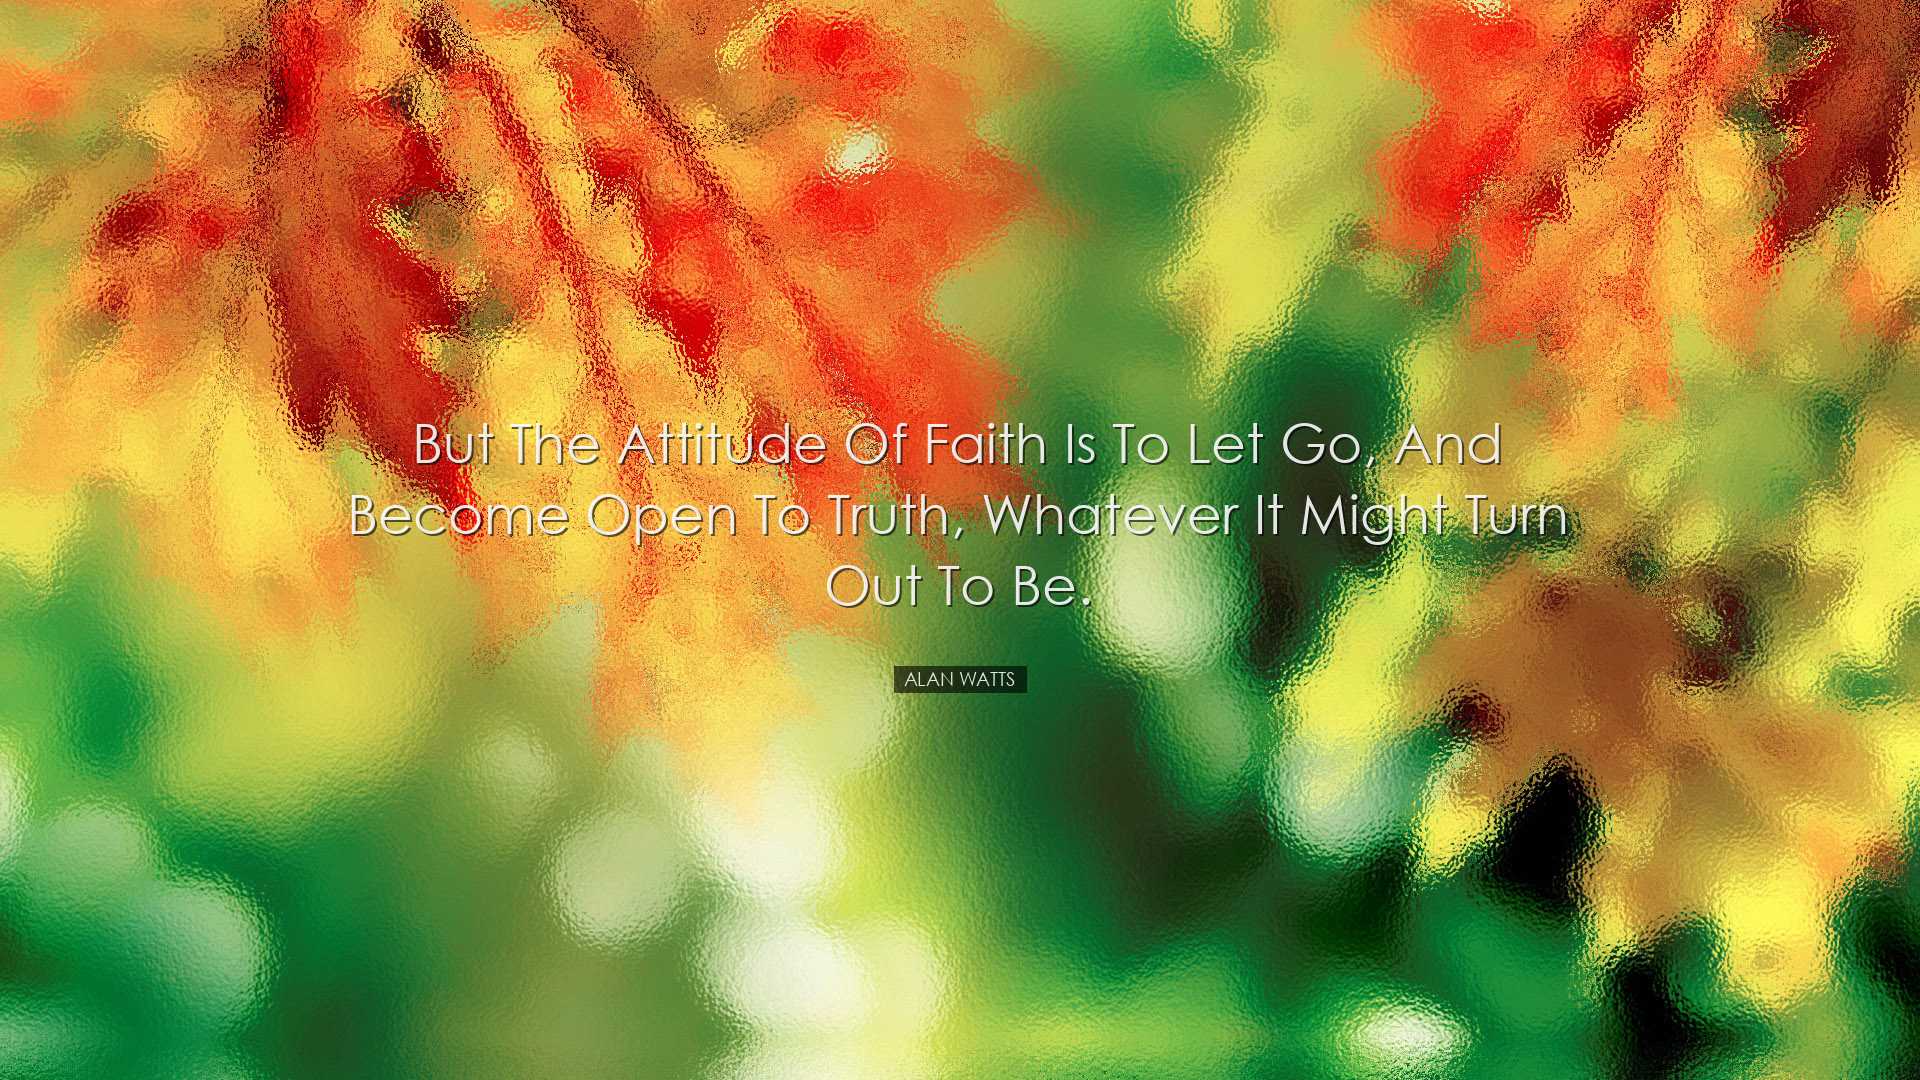 But the attitude of faith is to let go, and become open to truth,